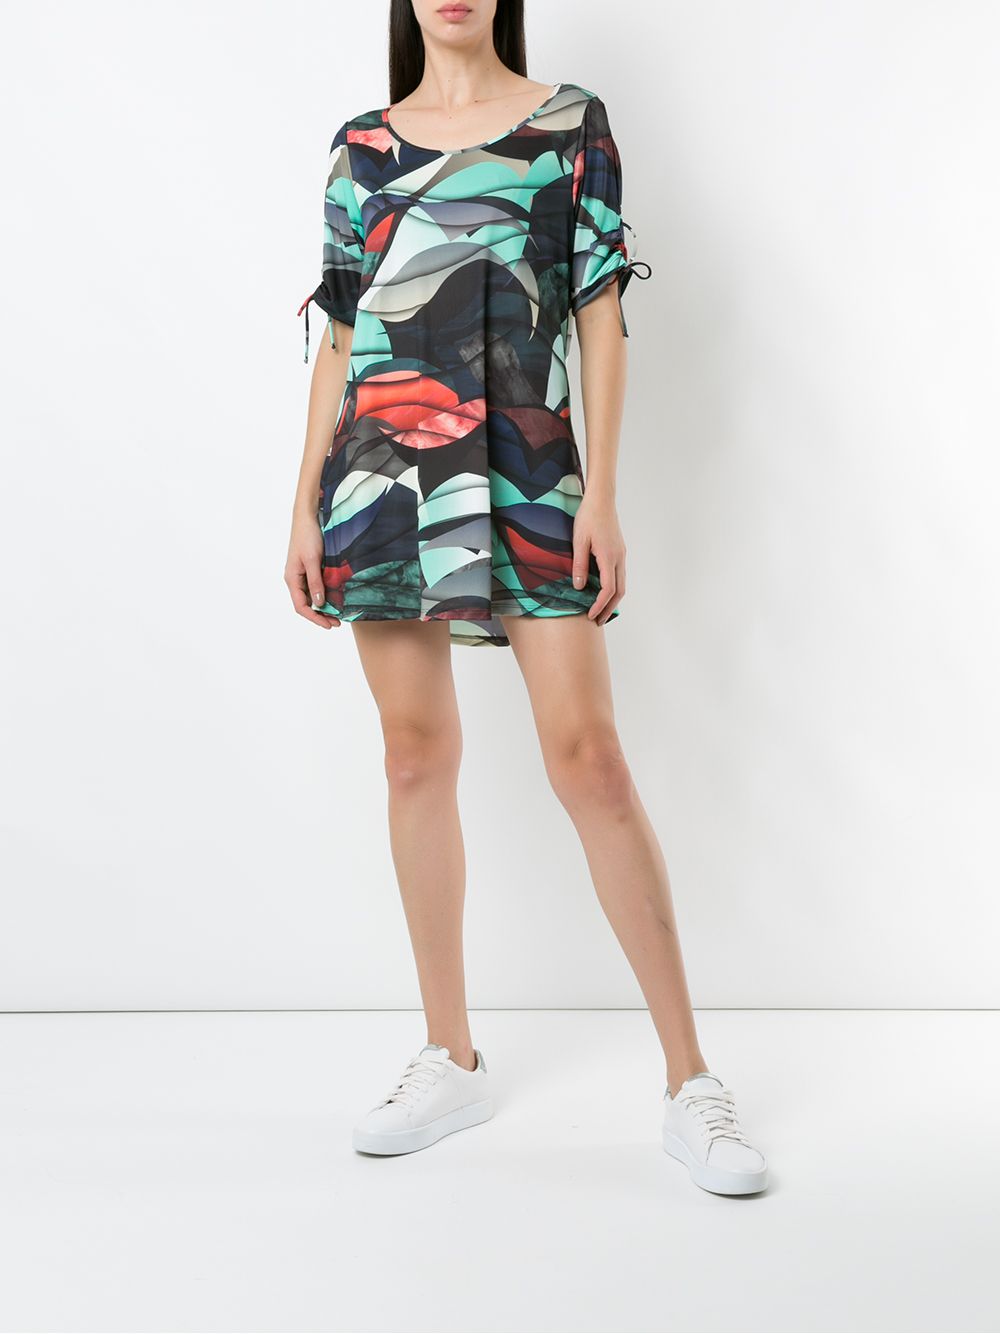 Shop Lygia & Nanny Batuira printed tunic with Express Delivery - FARFETCH